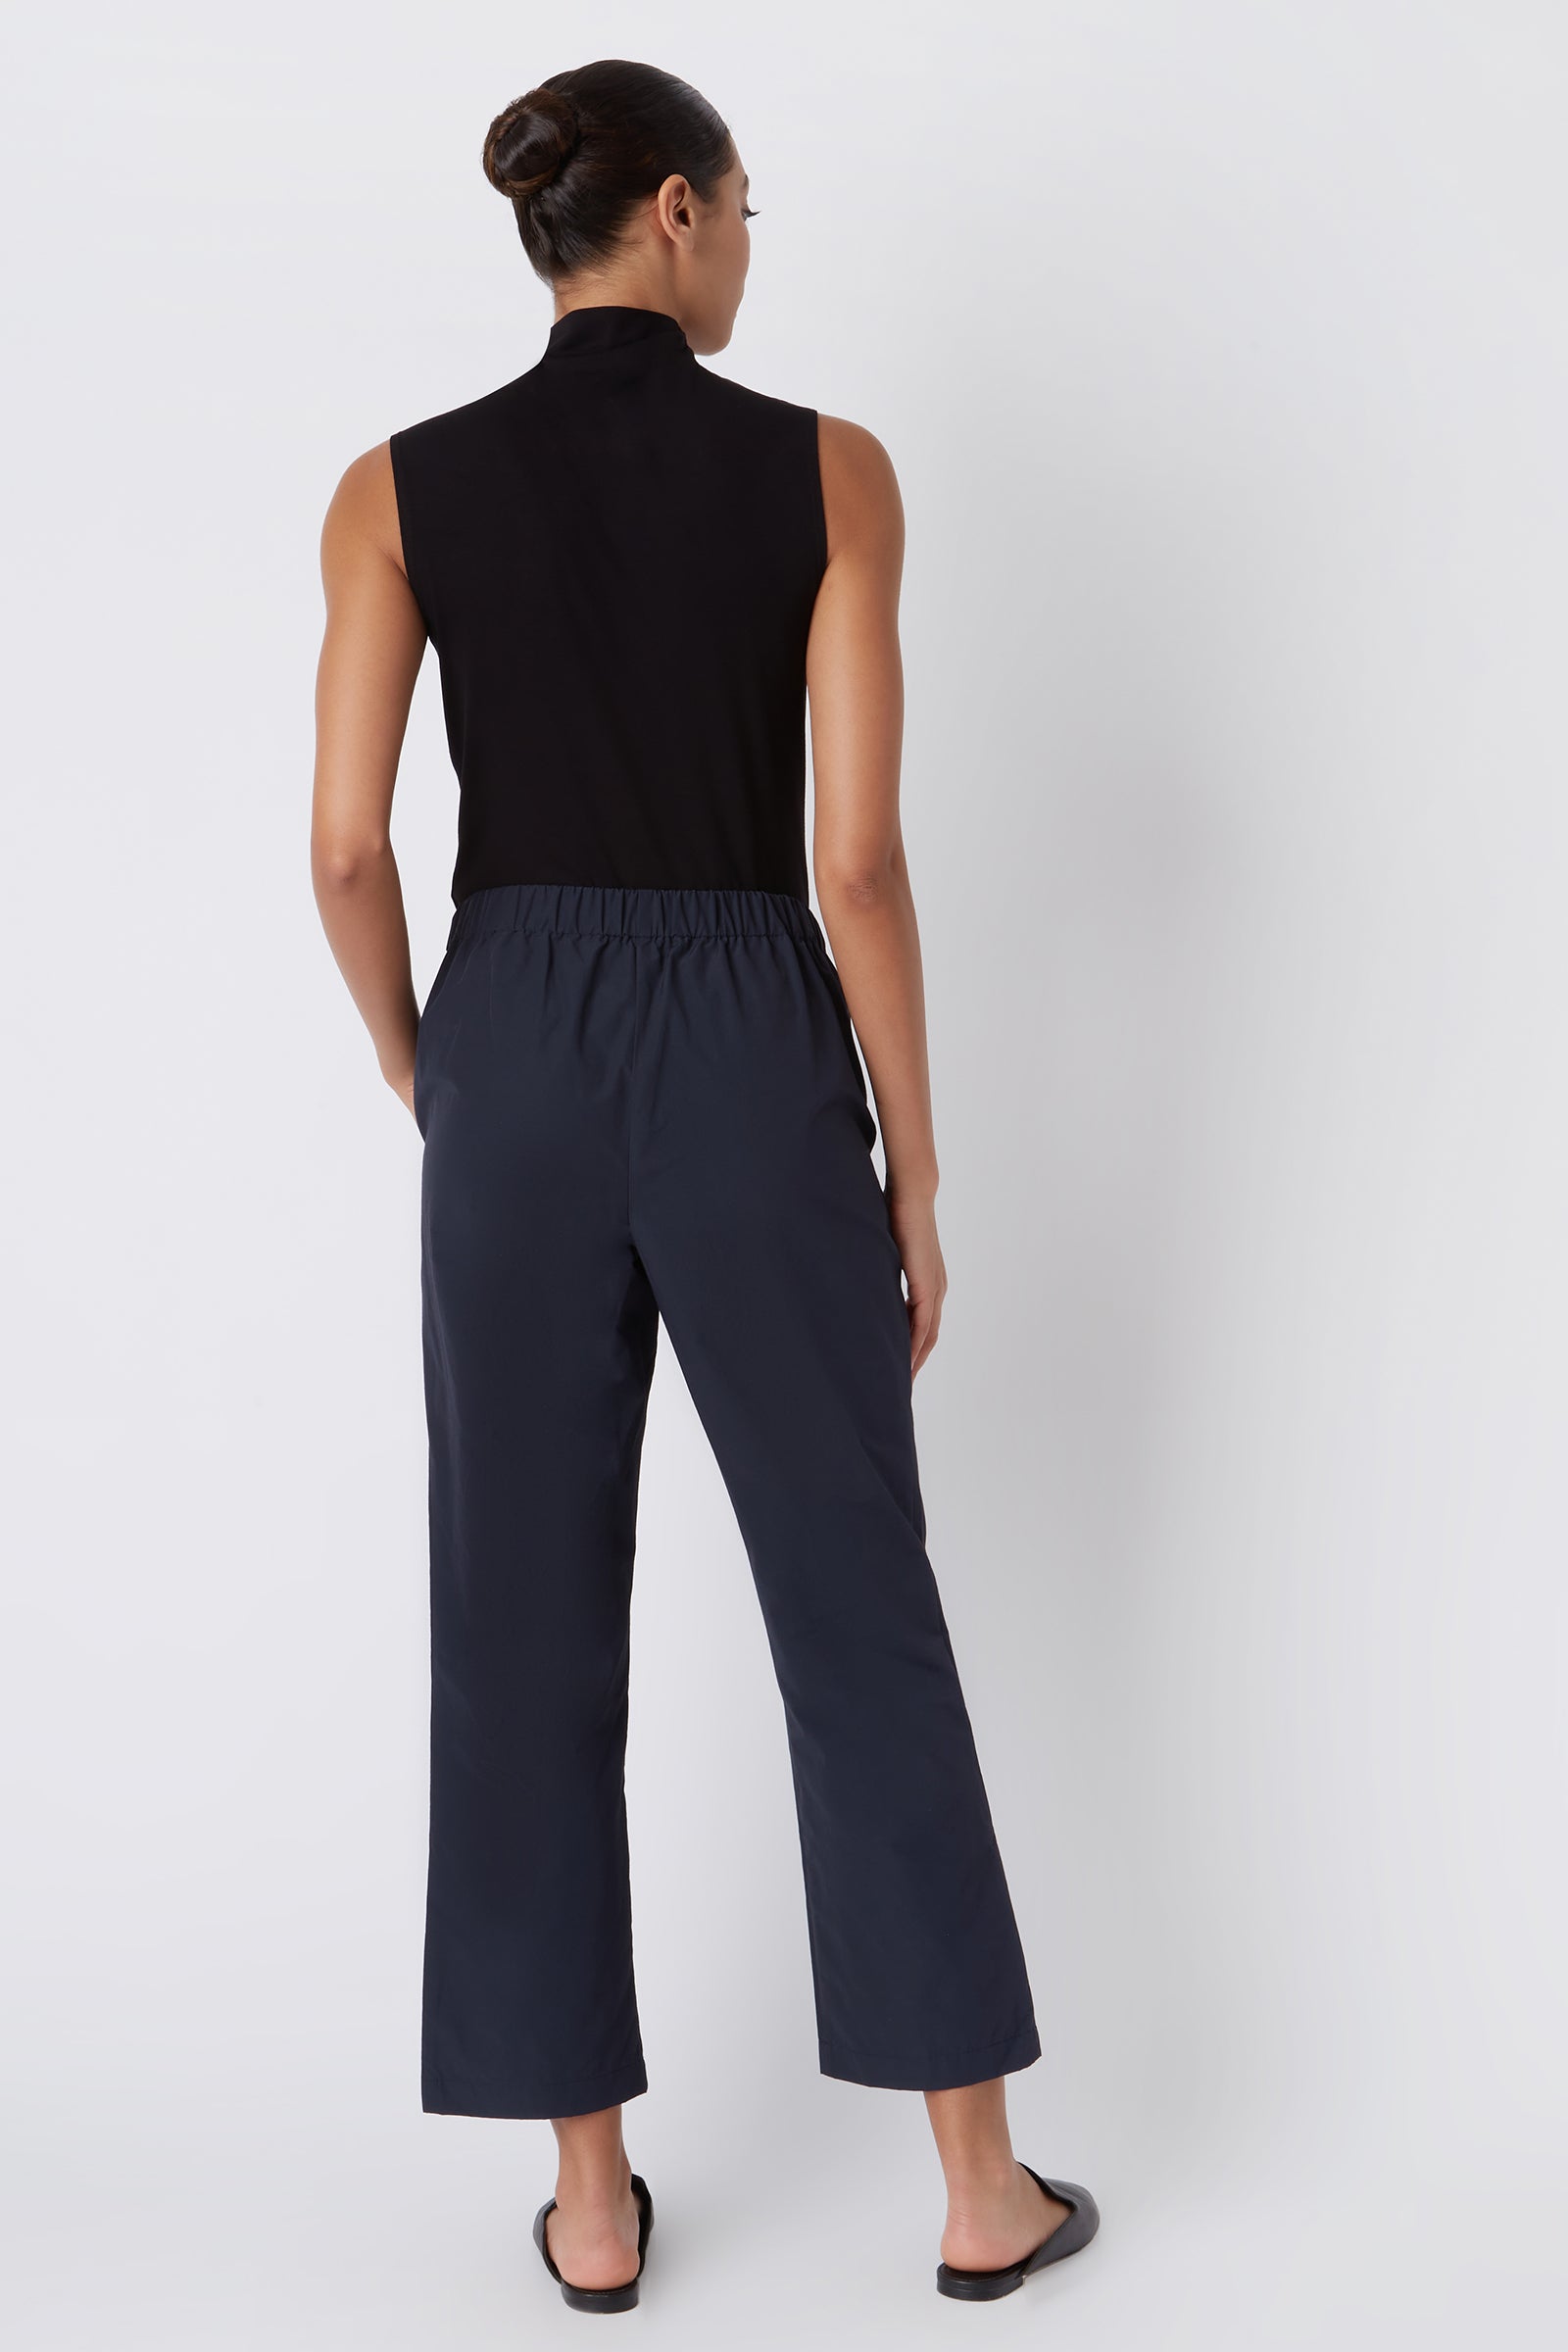 Kal Rieman Brit Crop Pant in Navy on Model with Hands in Pockets Full Front View